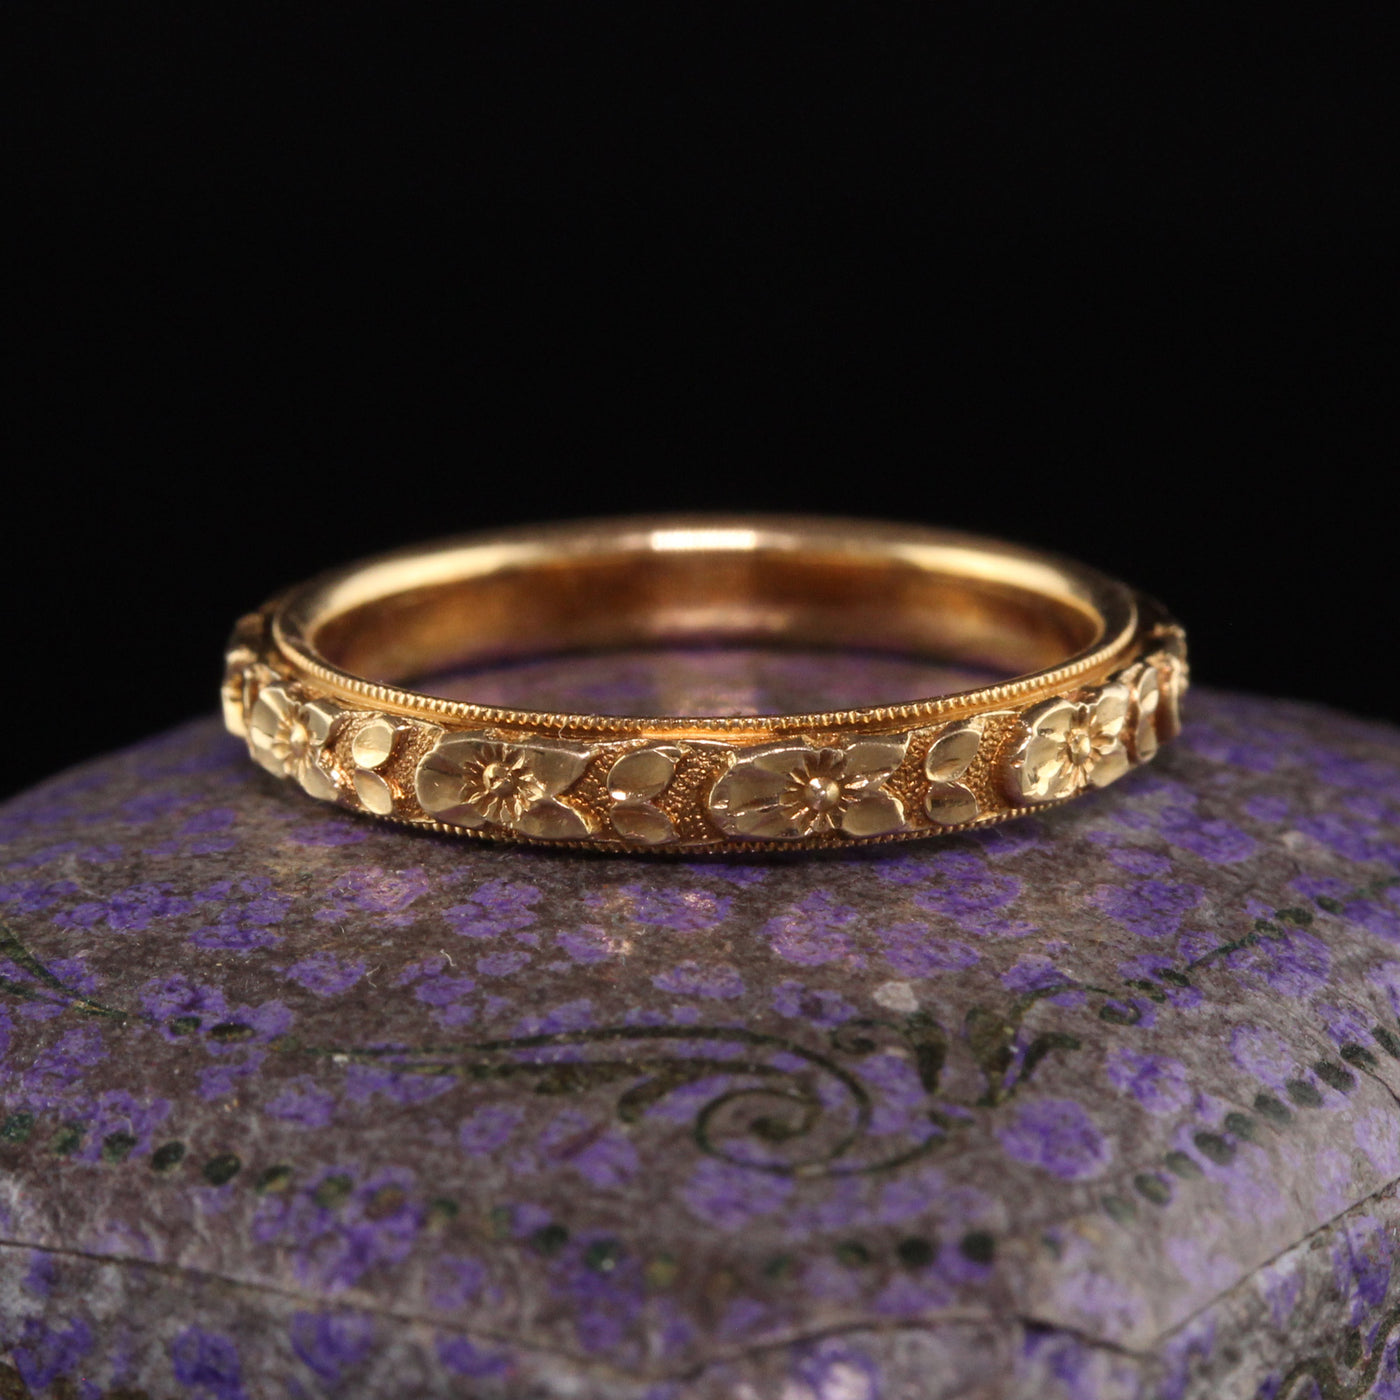 Antique Art Deco 14K Yellow Gold Engraved Wedding Band - Size 4 1/2